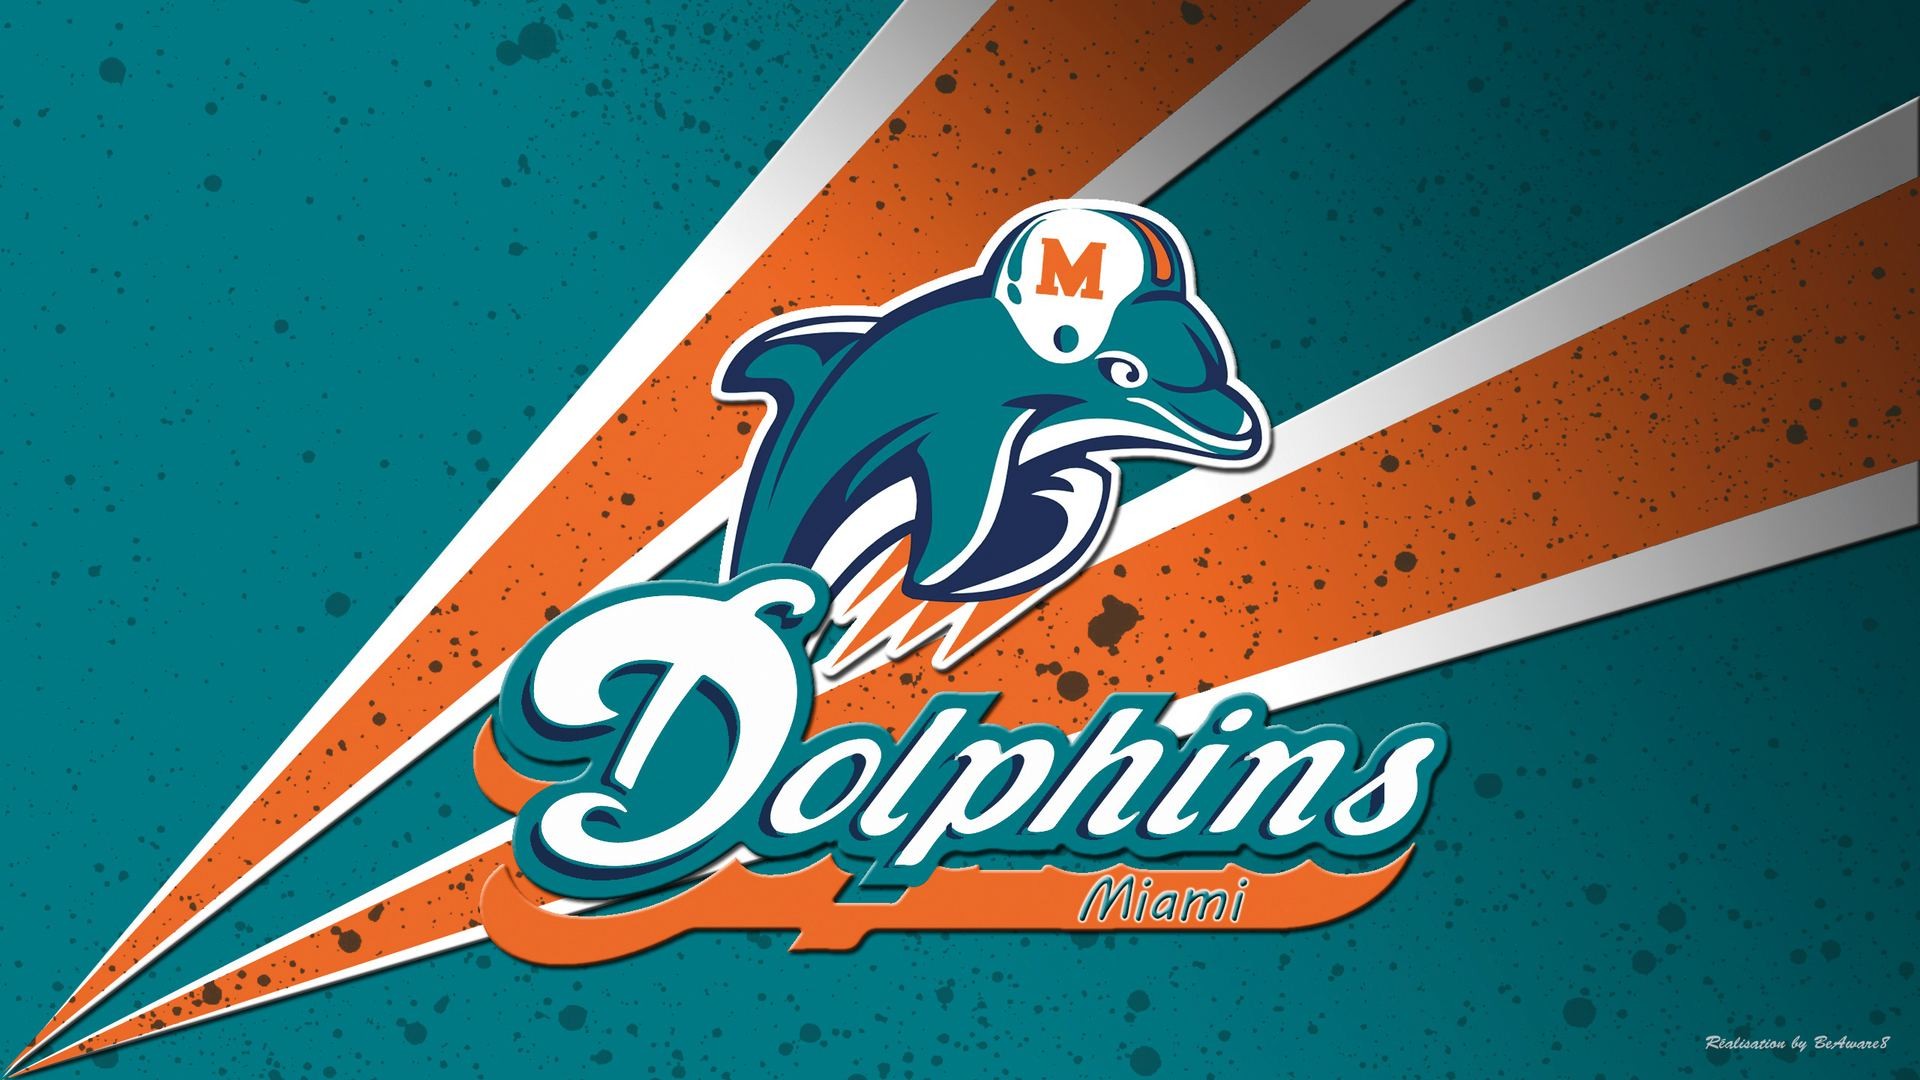 Wallpaper Desktop Miami Dolphins HD with resolution 1920x1080 pixel. You can make this wallpaper for your Mac or Windows Desktop Background, iPhone, Android or Tablet and another Smartphone device